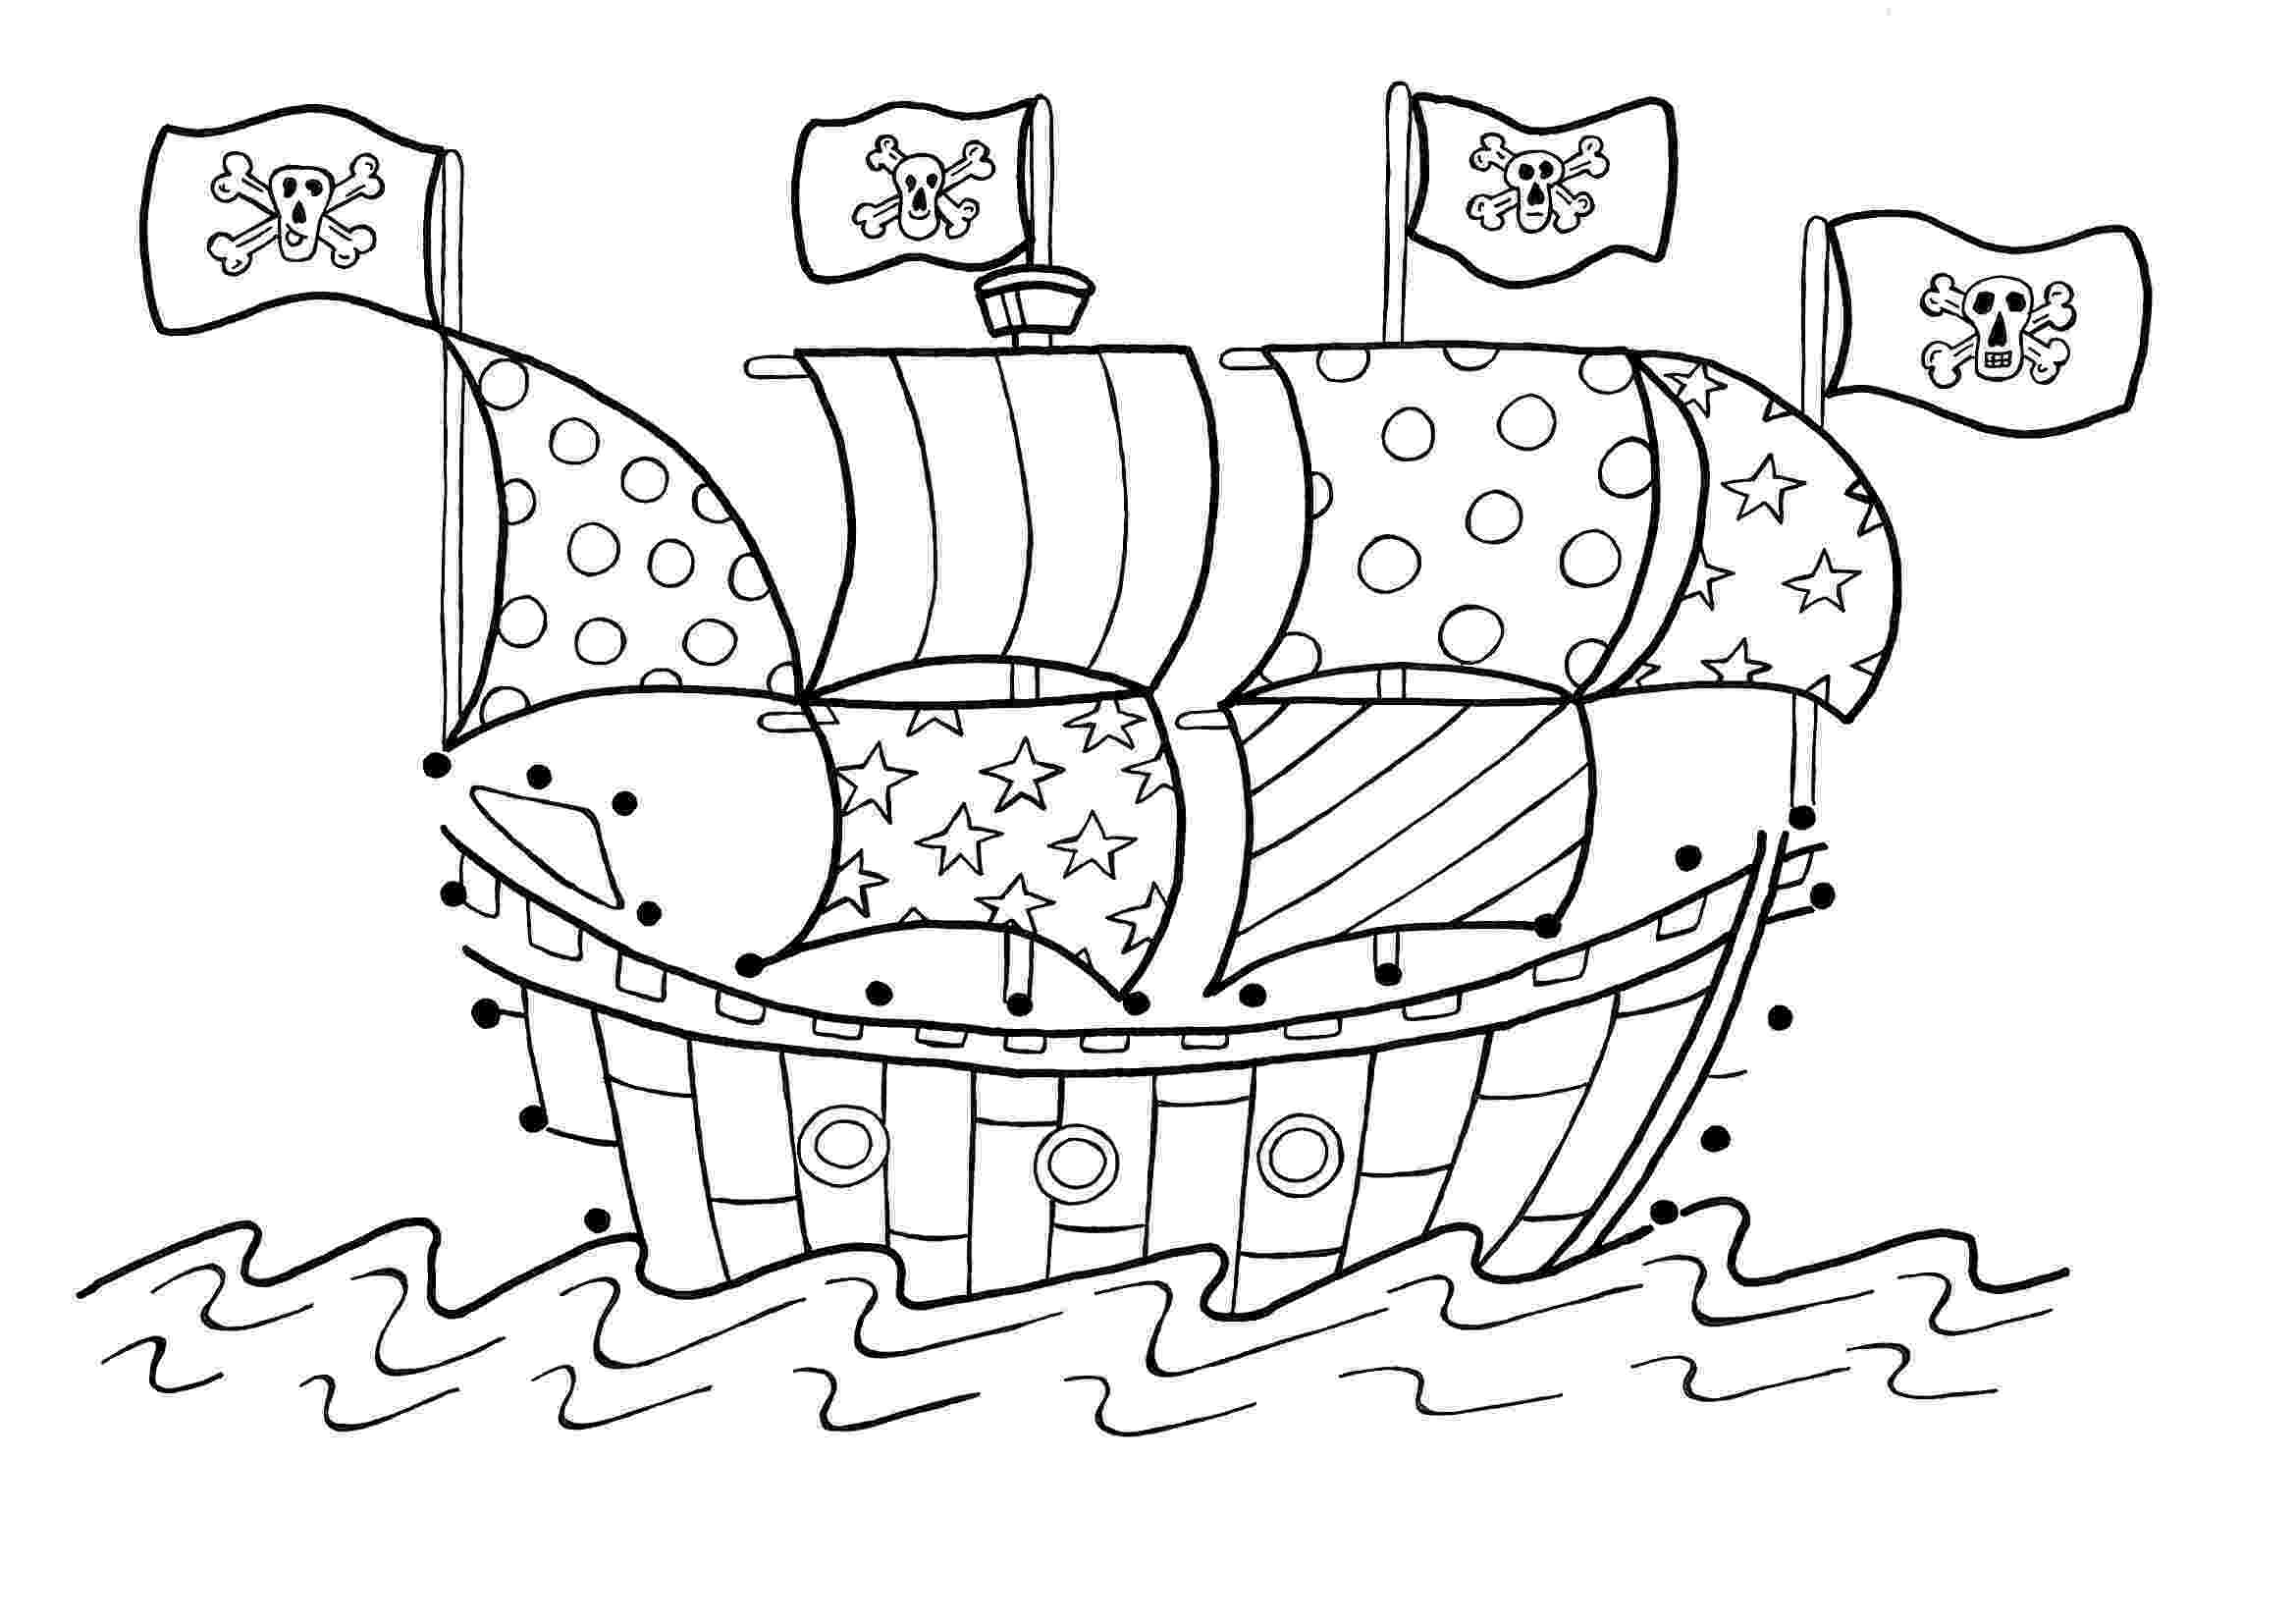 pirate coloring pages for kids printable free printable pirate coloring pages for kids kids coloring printable pages pirate for 